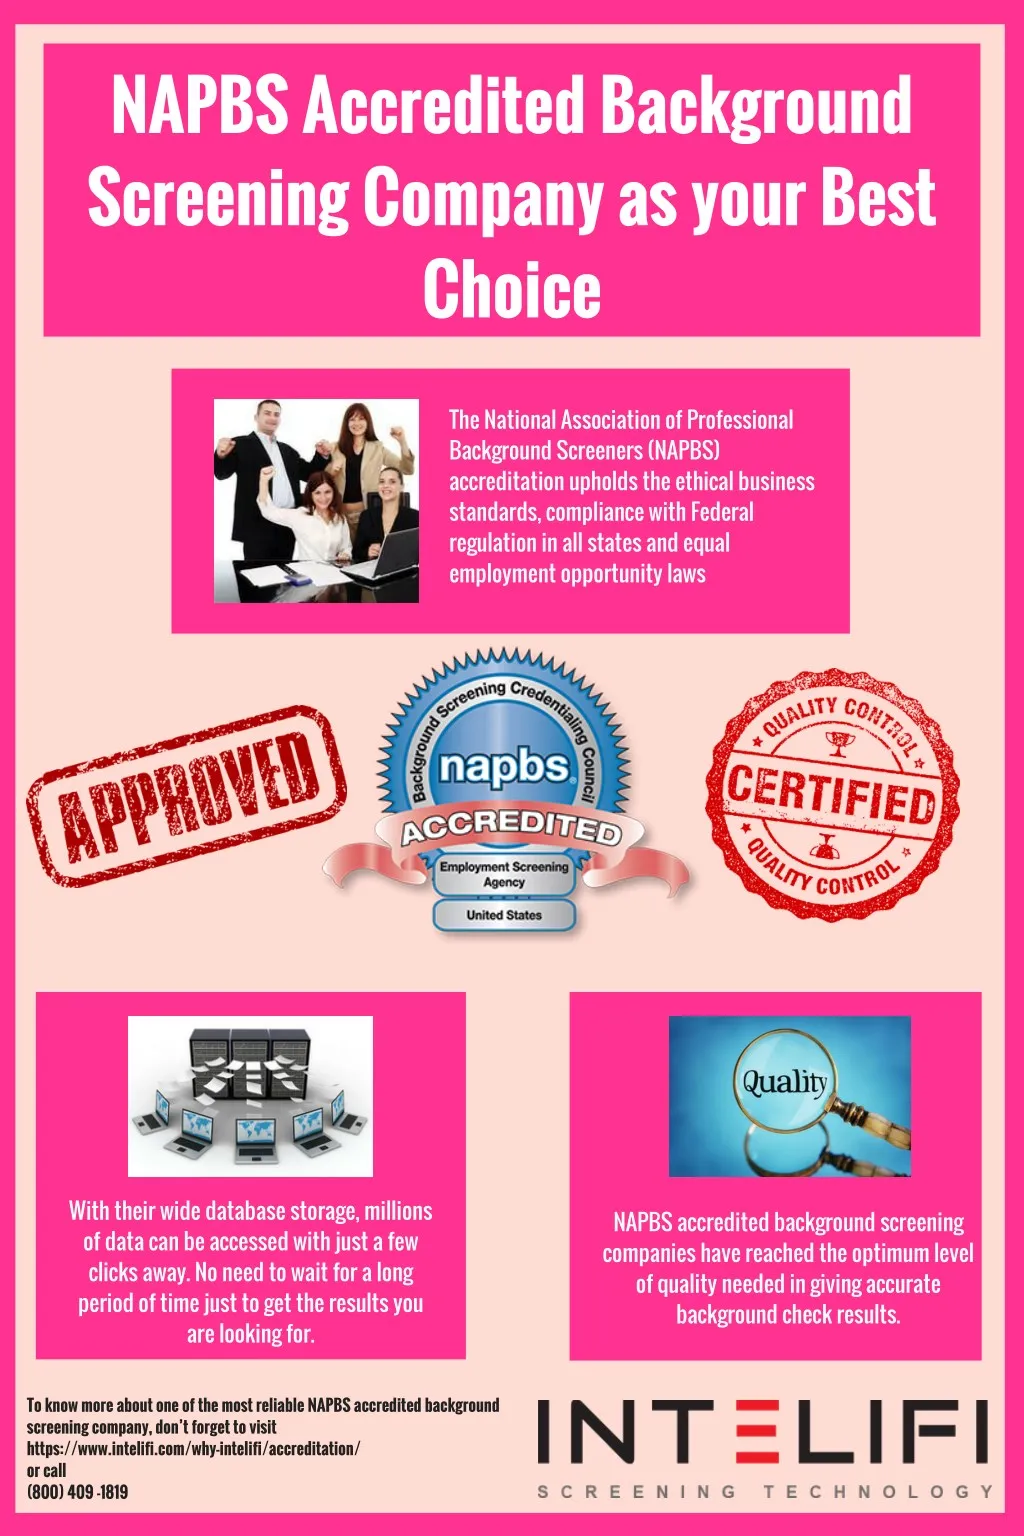 napbs accredited background screening company